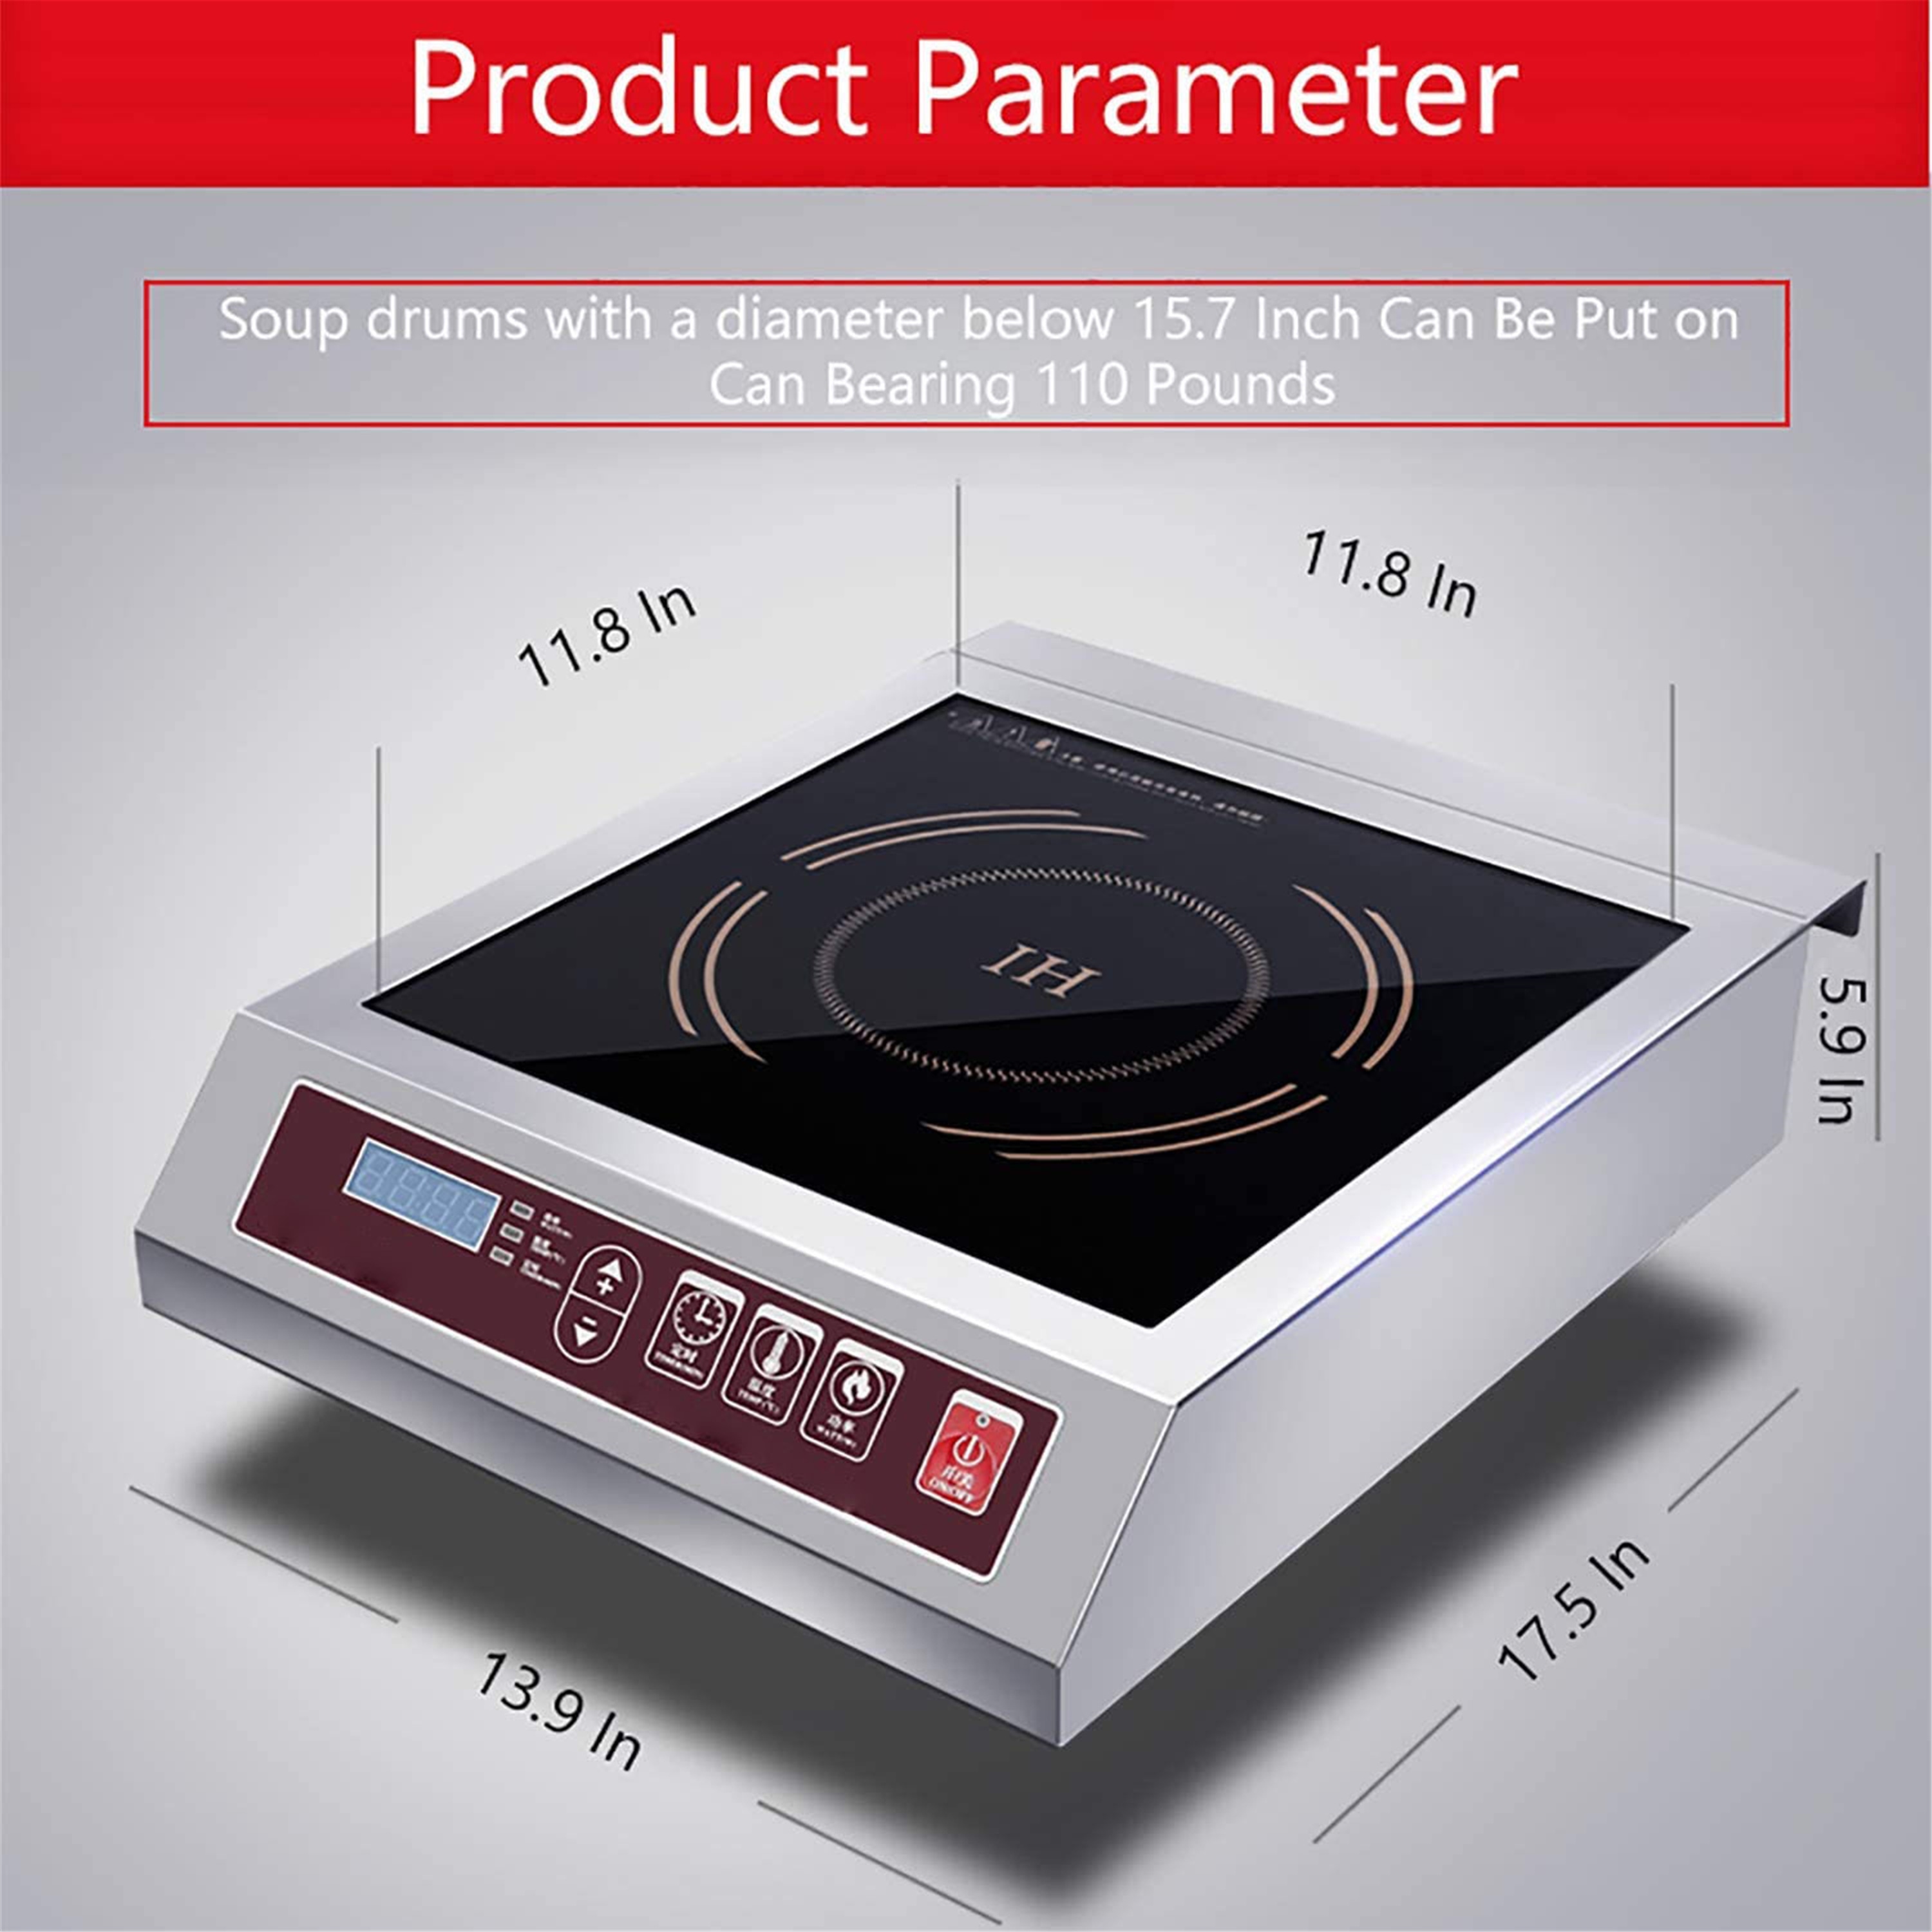 AplusBuy 3500W Commercial Induction Cooktop Electric Stove Burner Rapid Heating Stainless Steel